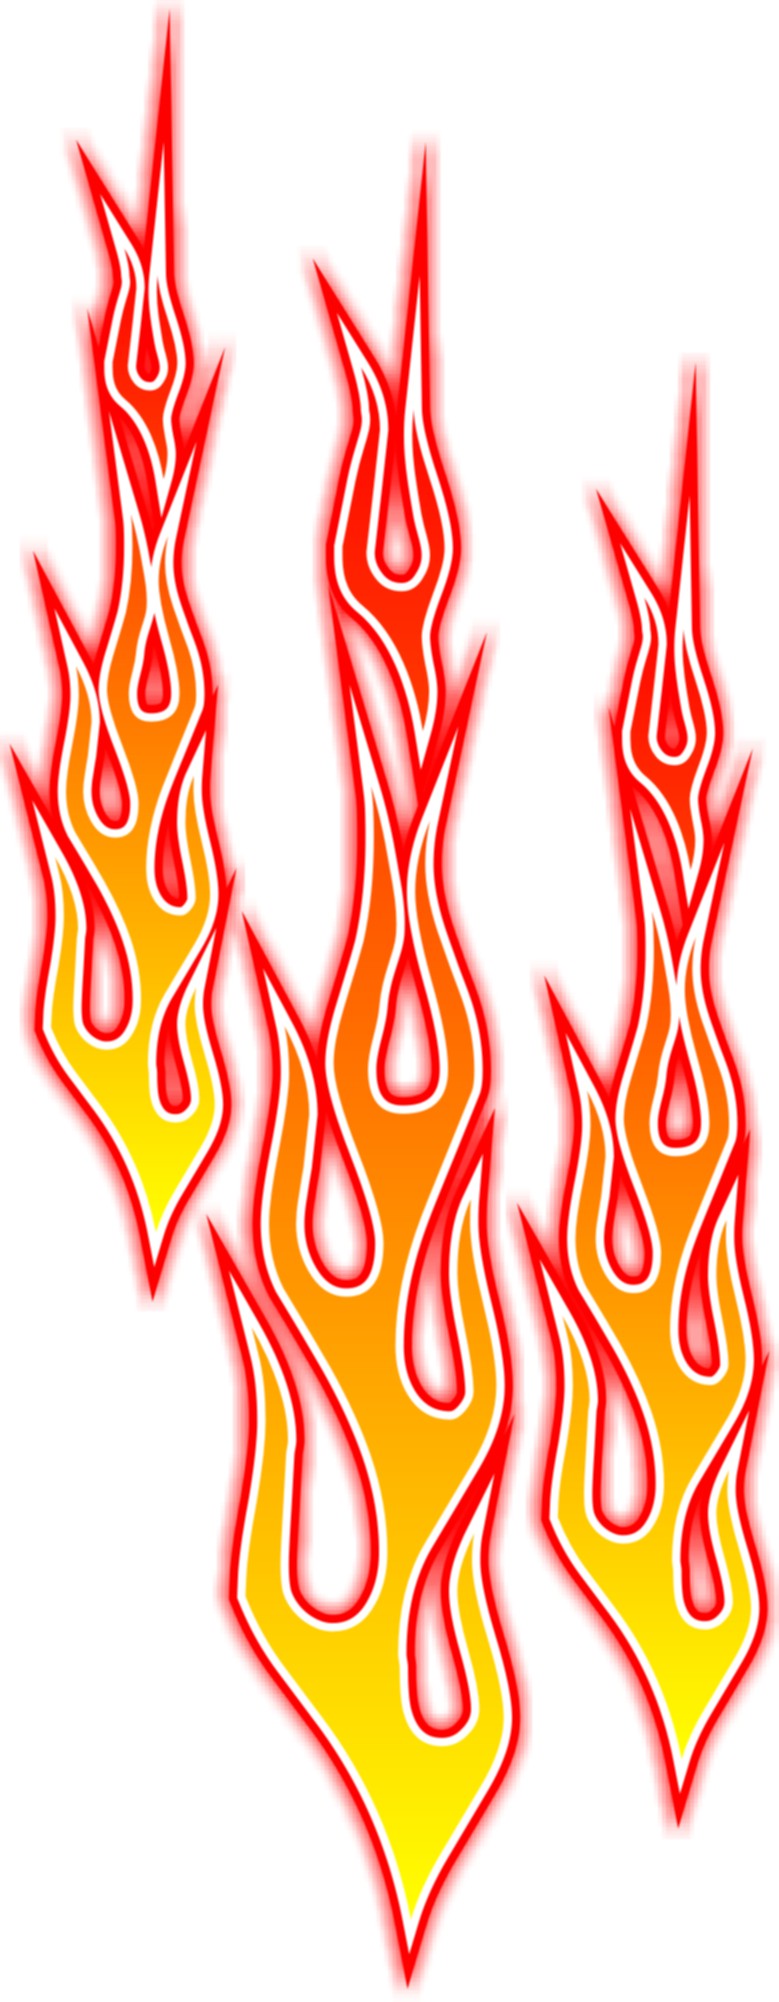 Flames free flame clipart the cliparts clipartix